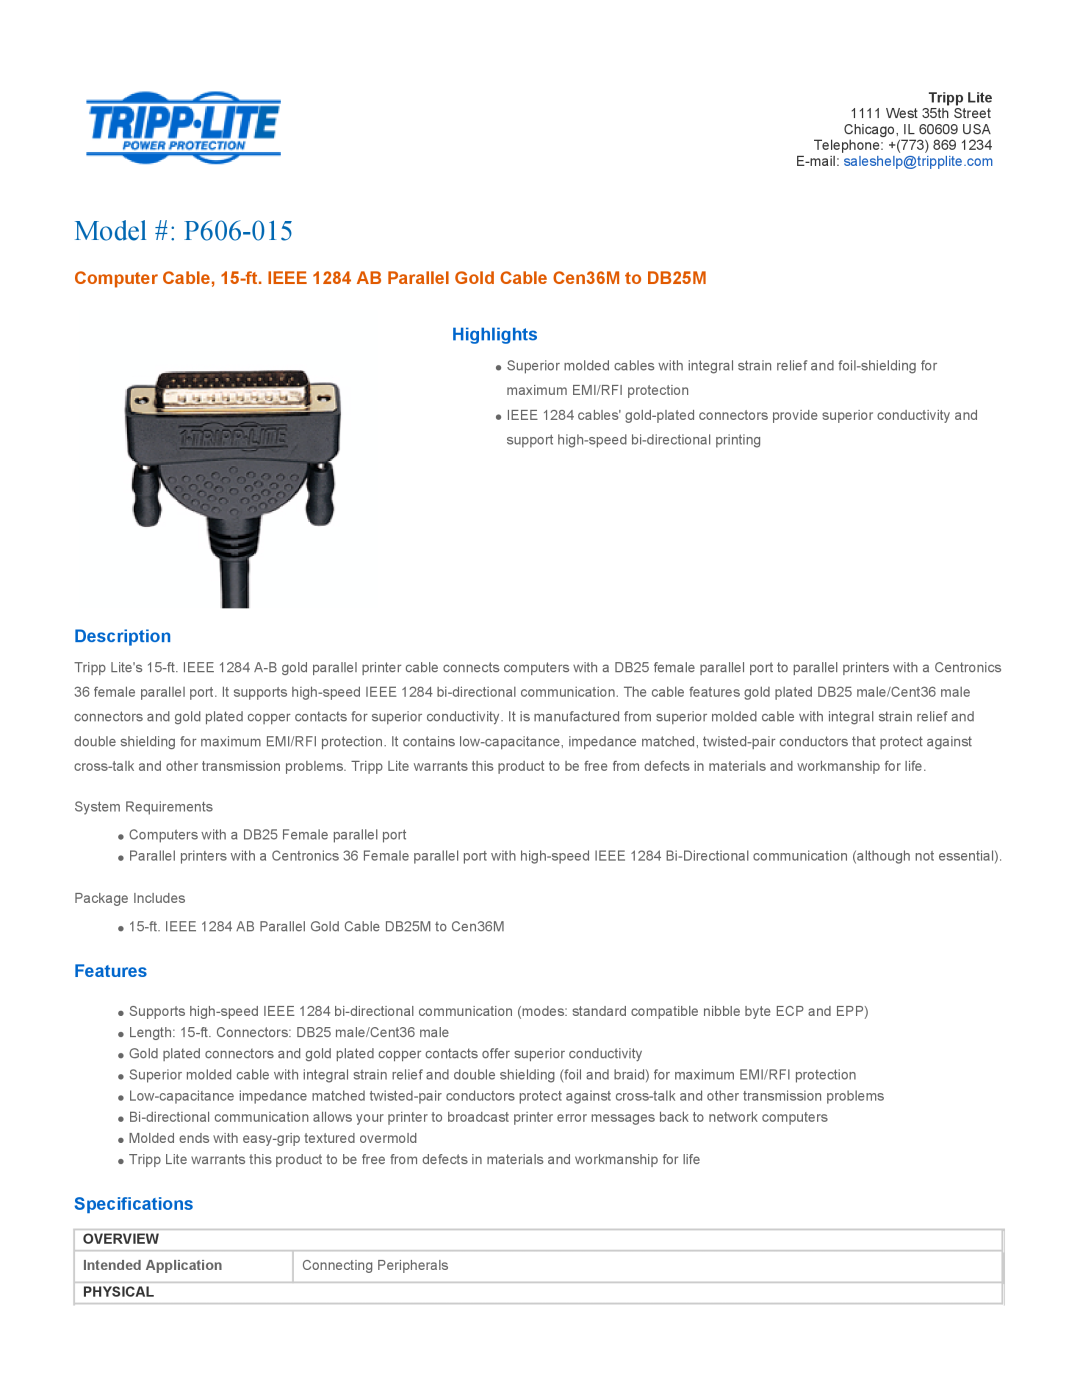 Tripp Lite P606-010 specifications Highlights, Description, Features, Specifications, Overview, Physical, Model # P606-015 